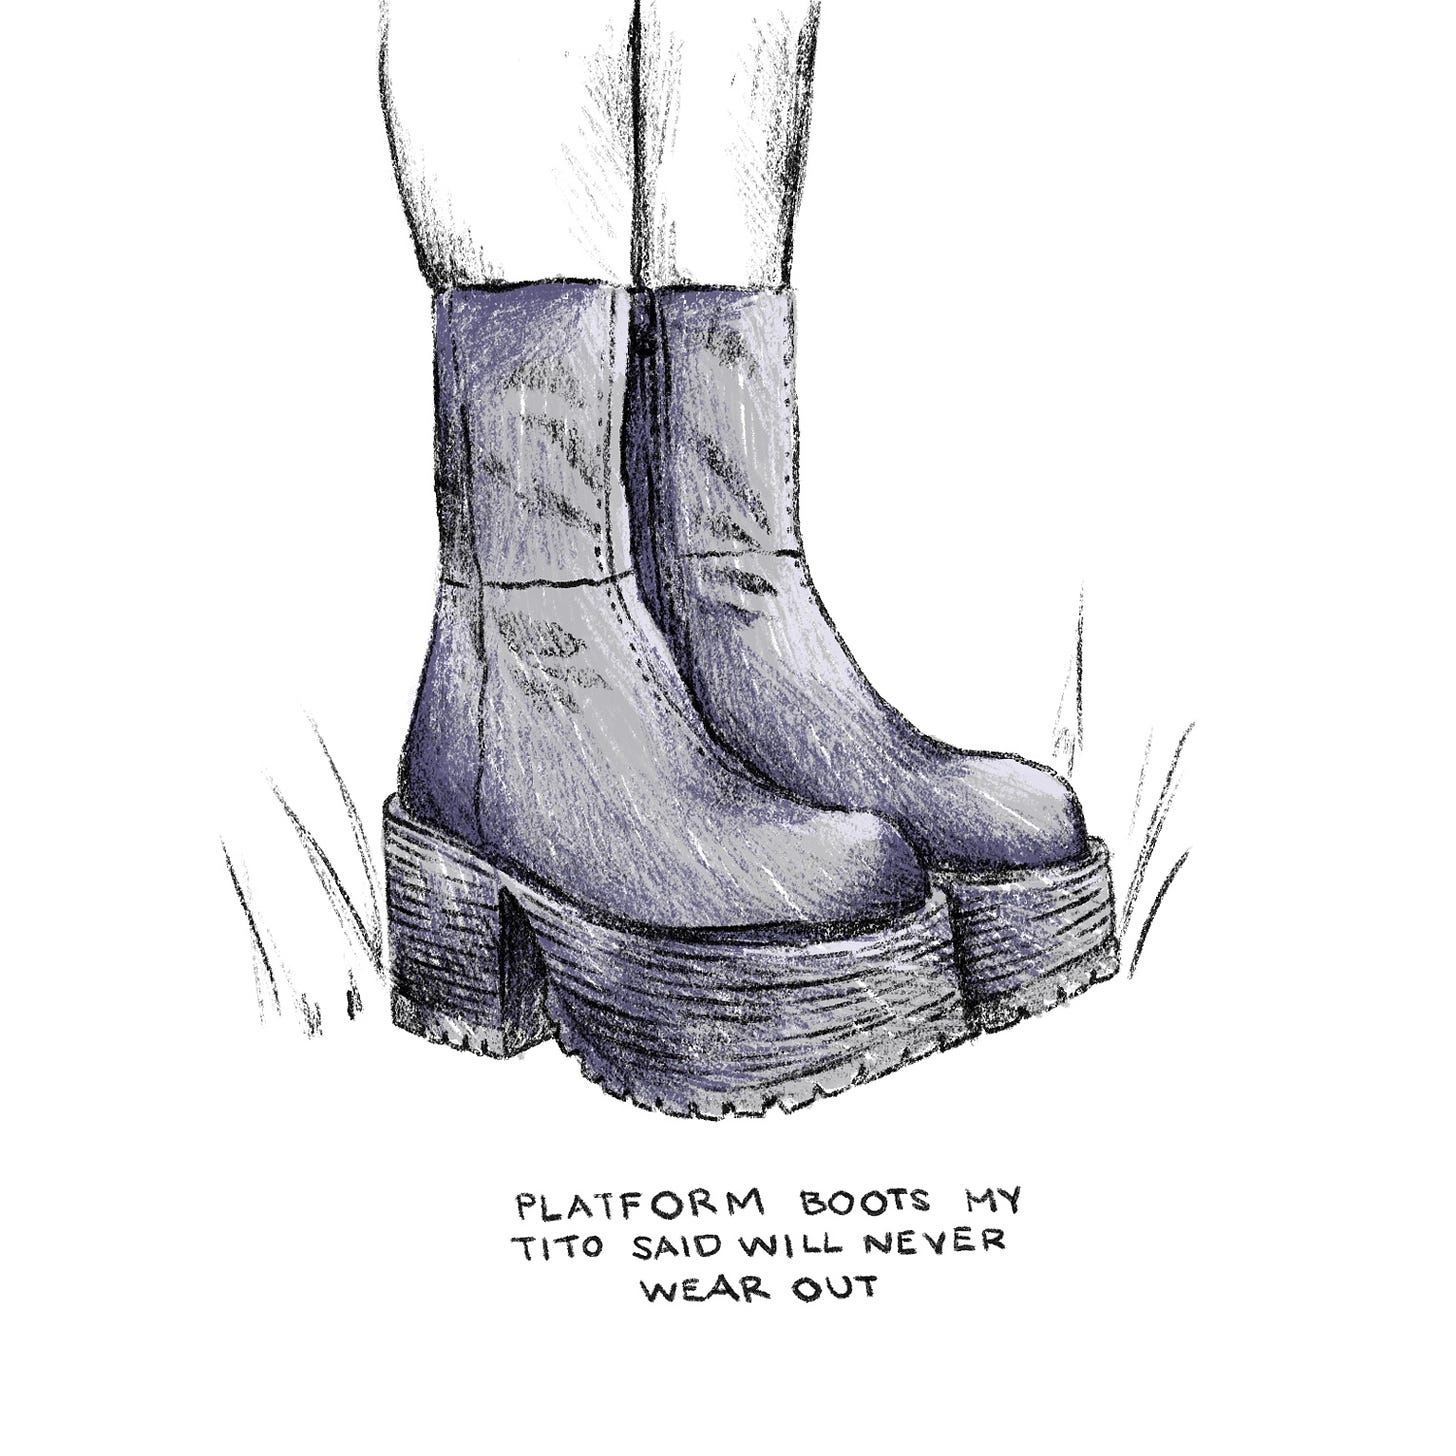 platform boots my tito said will never wear out, pencil illustration of black leather boots